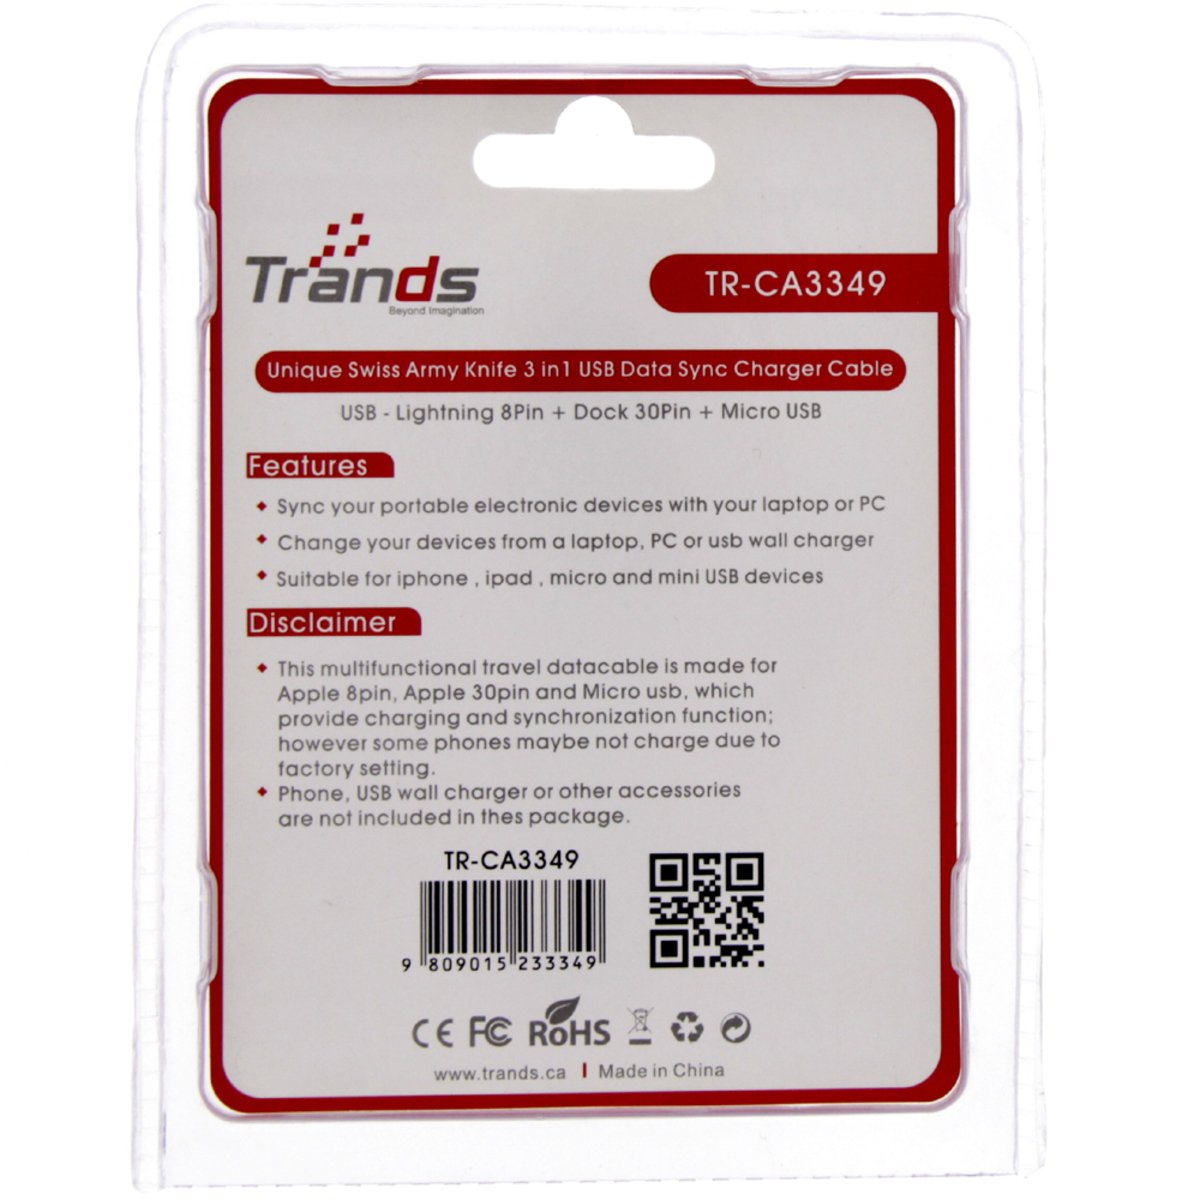 Trands 3in1 USB Cable Knife 3349